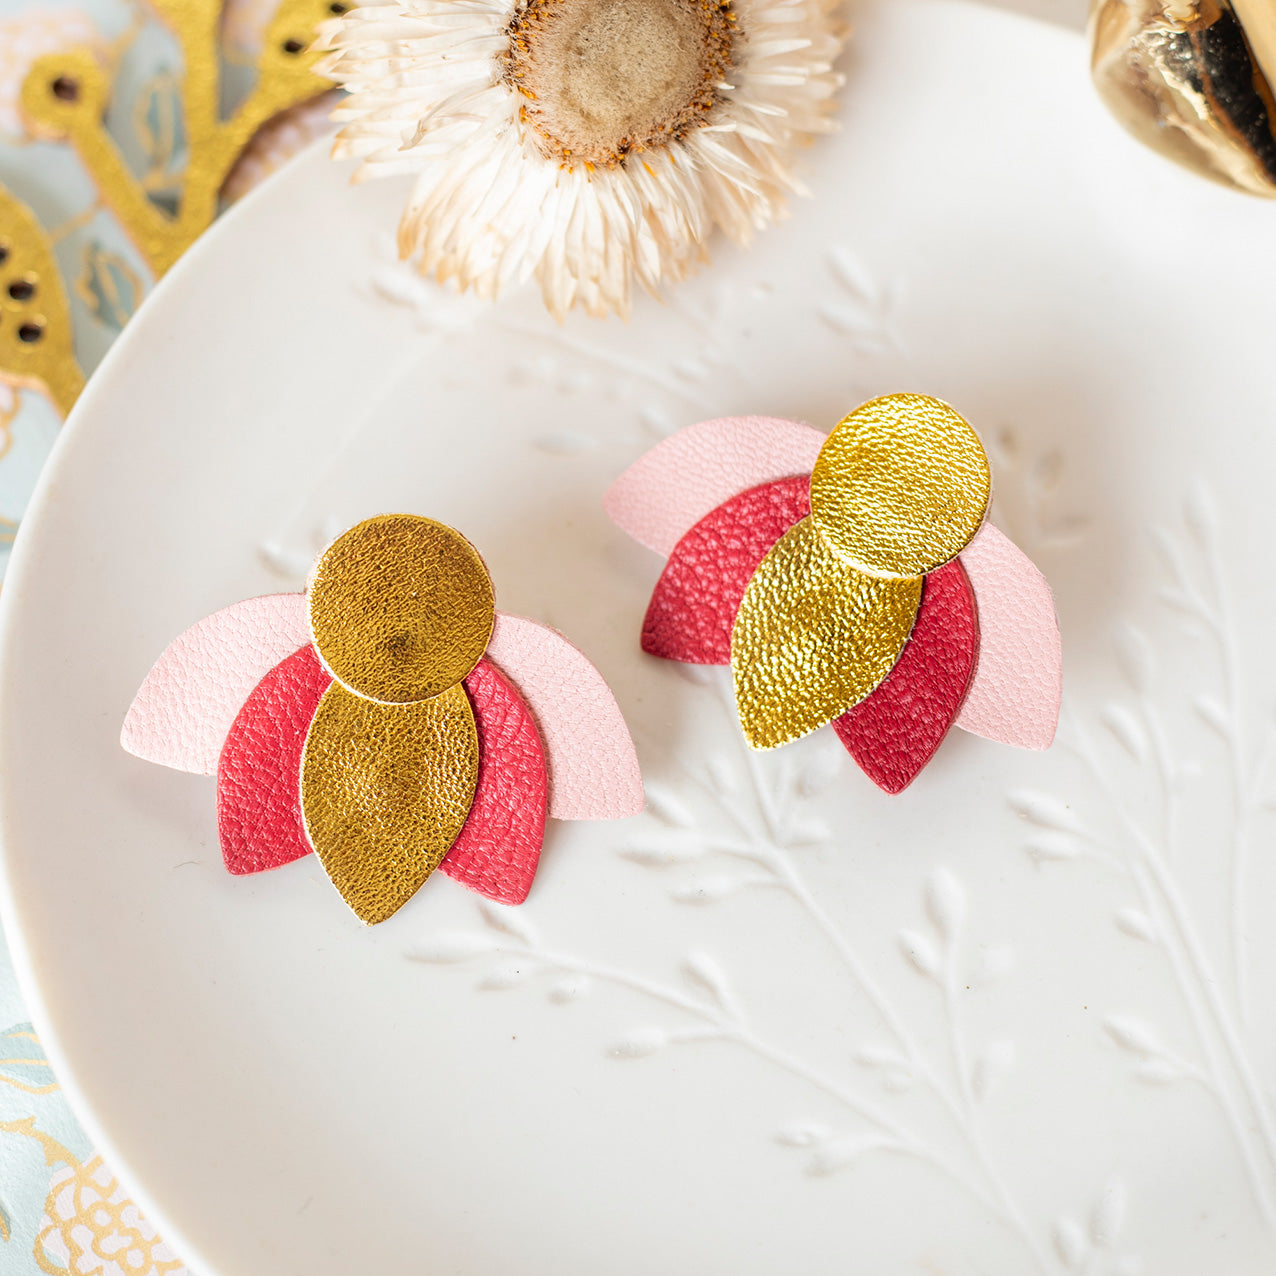 Large Lotus Flower stud earrings - sugared pink, dark red and gold